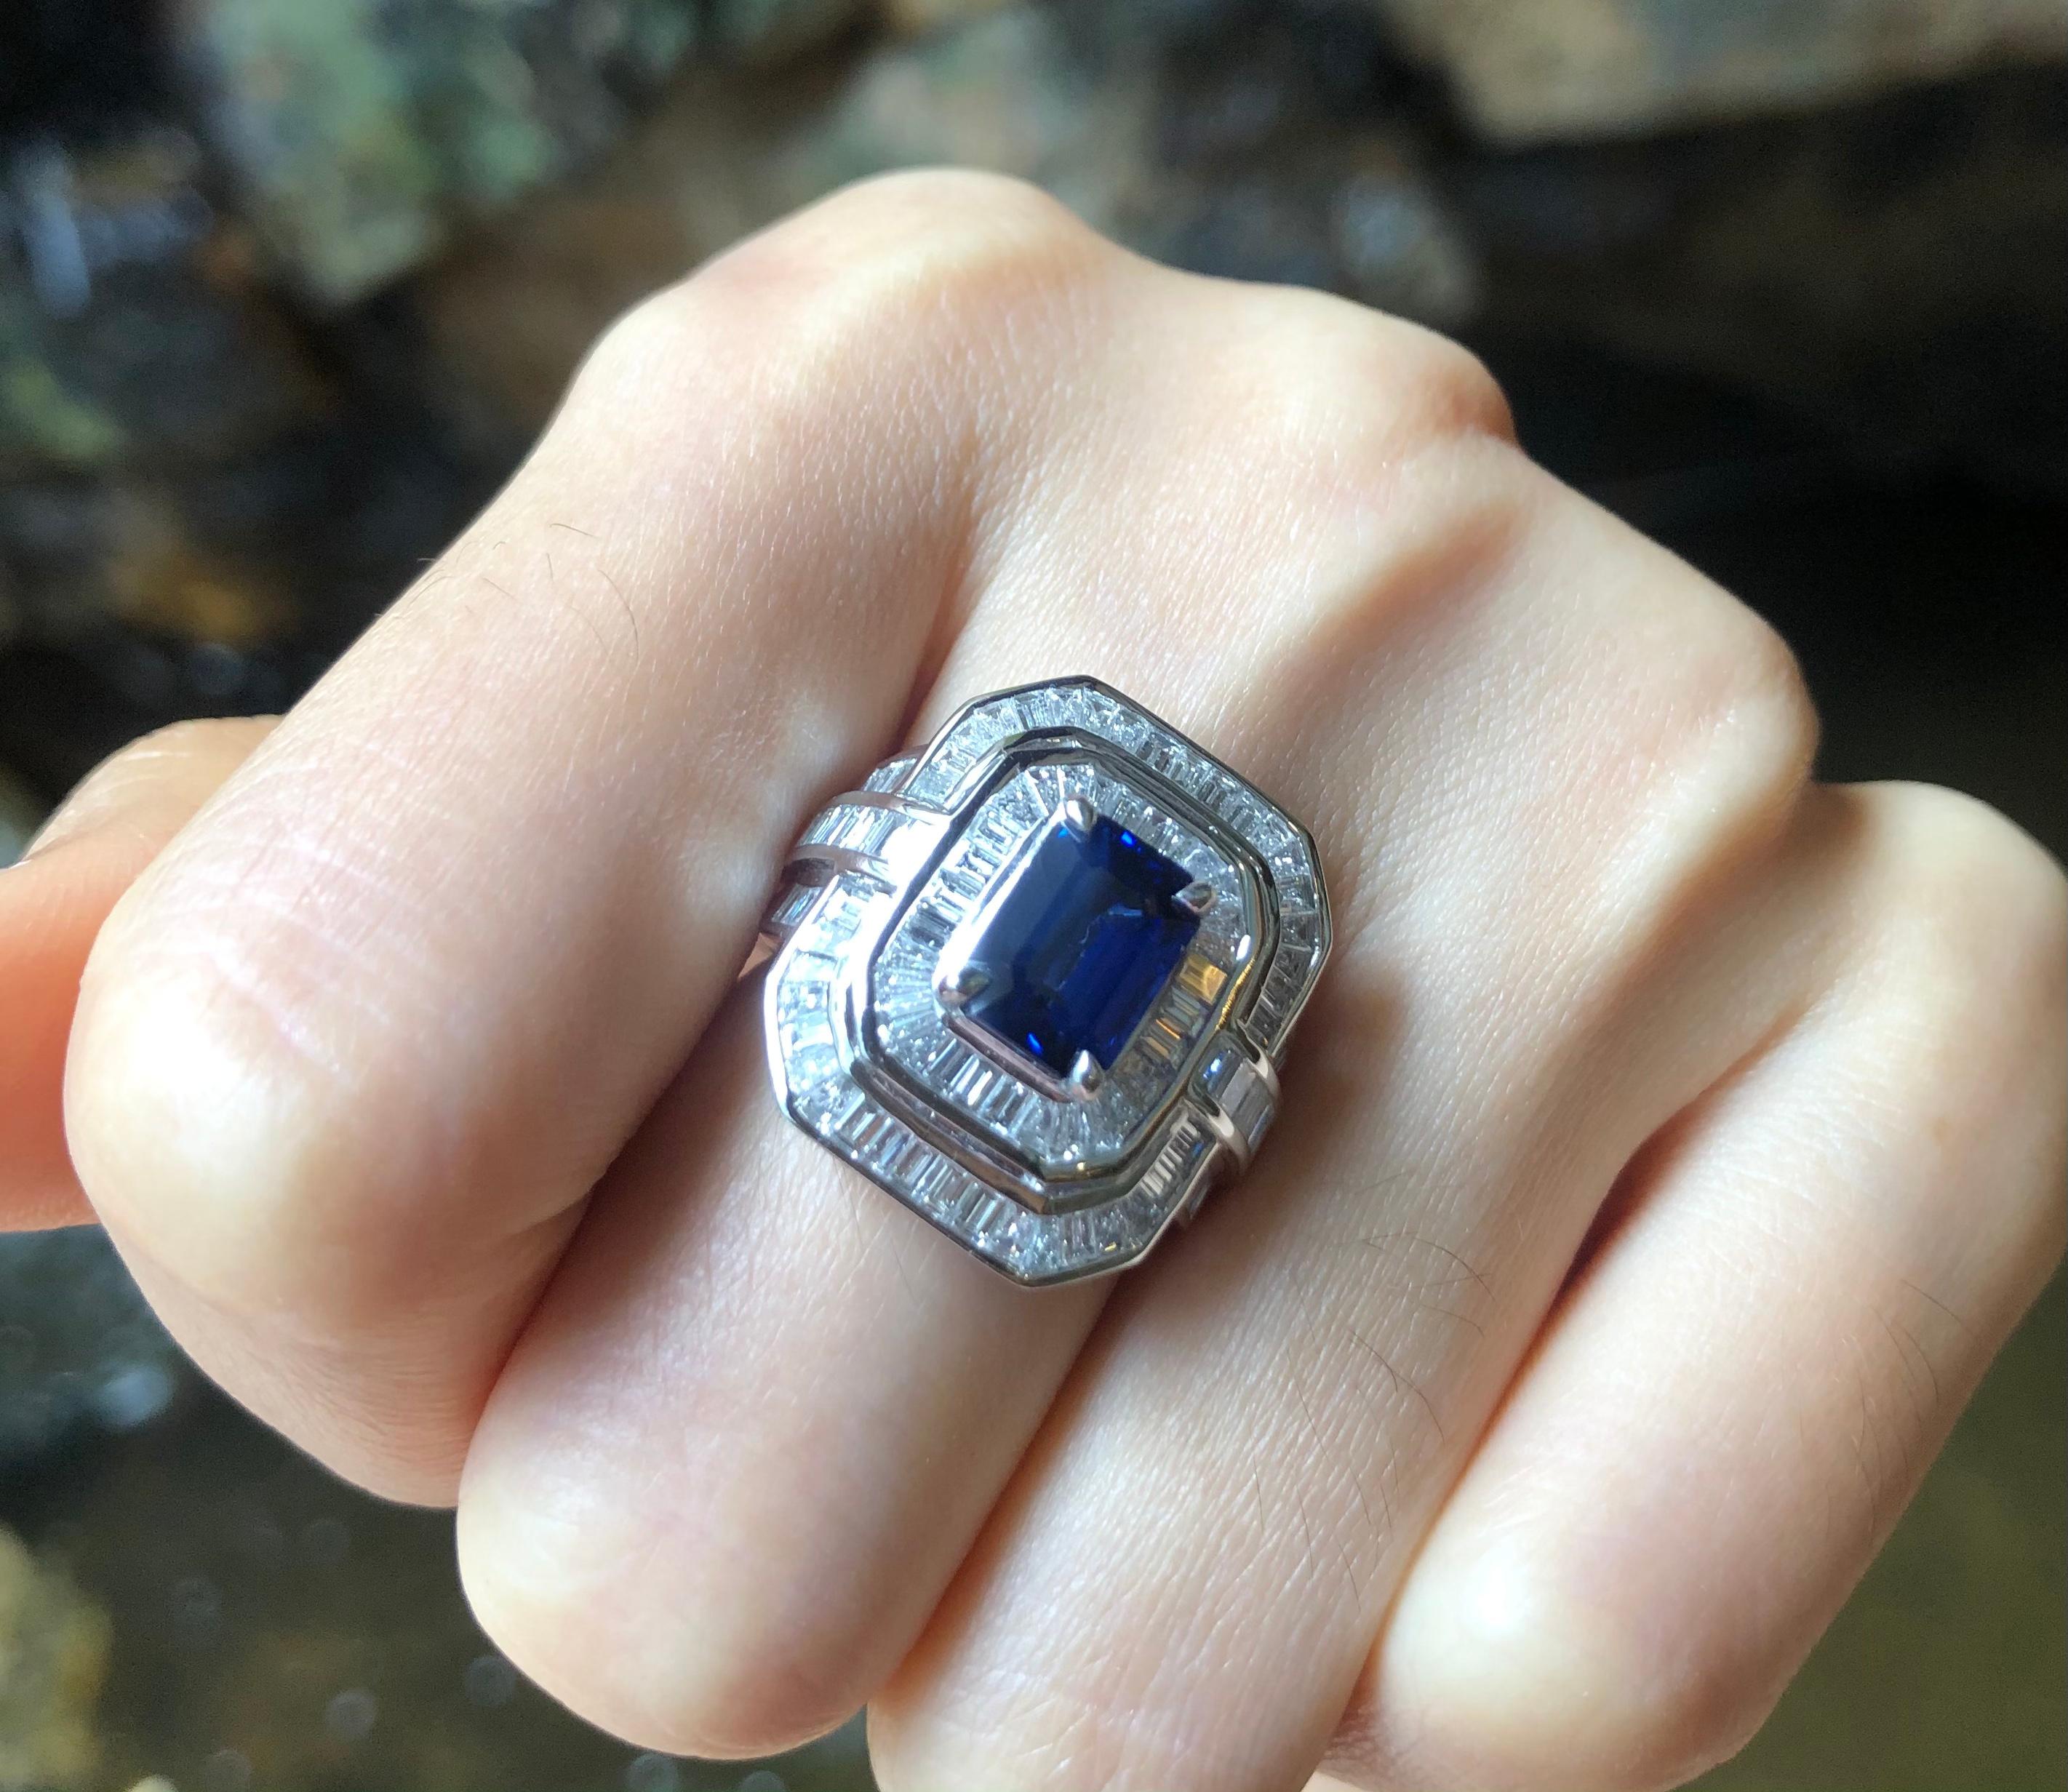 Blue Sapphire 2.39 carats with Diamond 0.88 carat Ring set in Platinum 950 Settings

Width:  0.6 cm 
Length: 0.8 cm
Ring Size: 53
Total Weight: 15.07 grams

